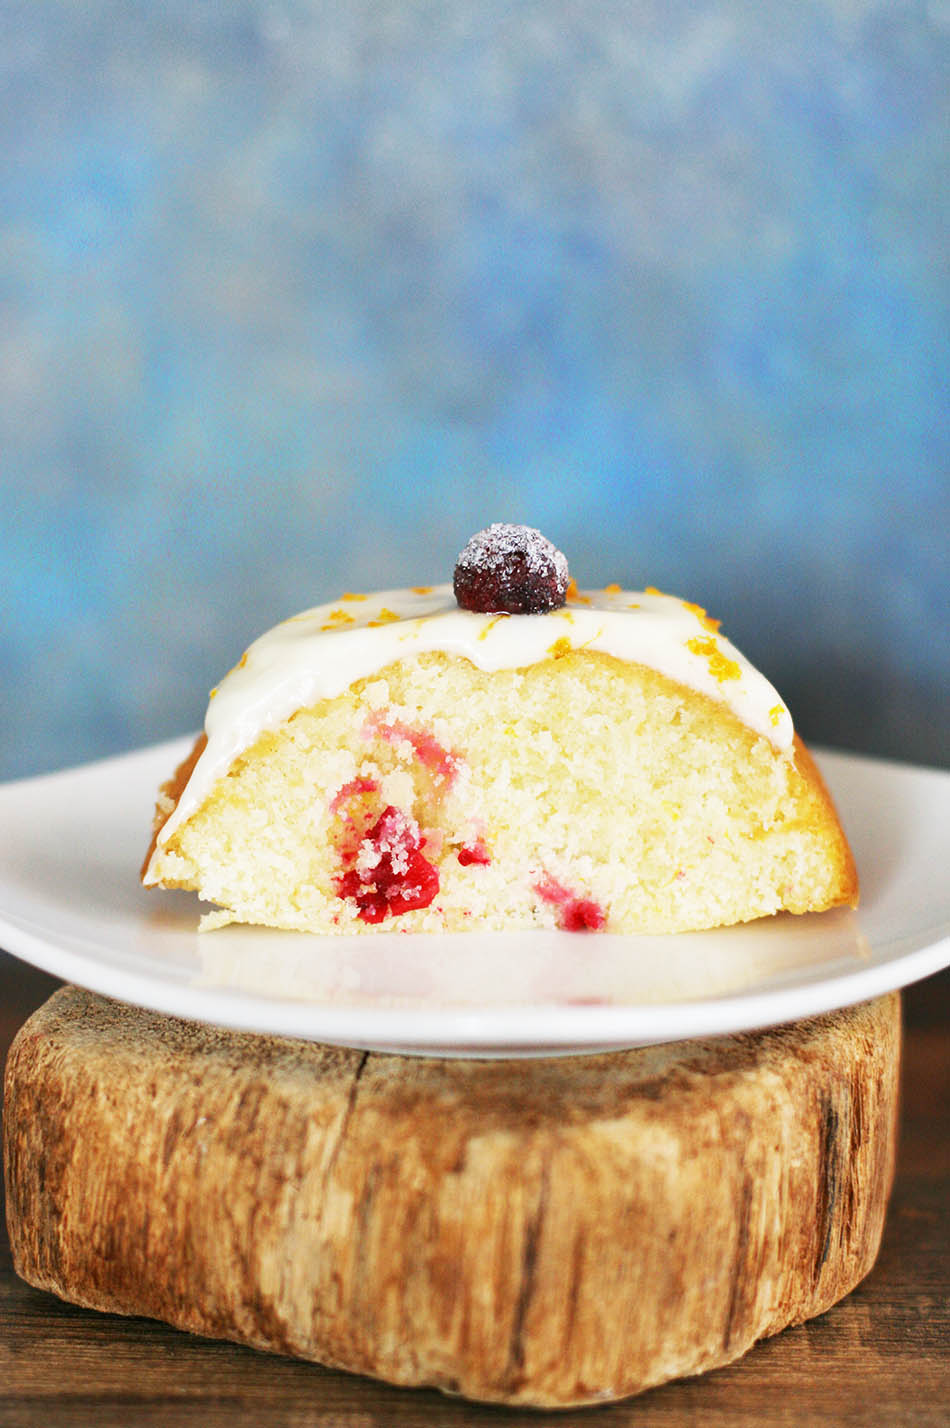 Cranberry almond cake with orange zest: Refreshing and tart! Click through for recipe.